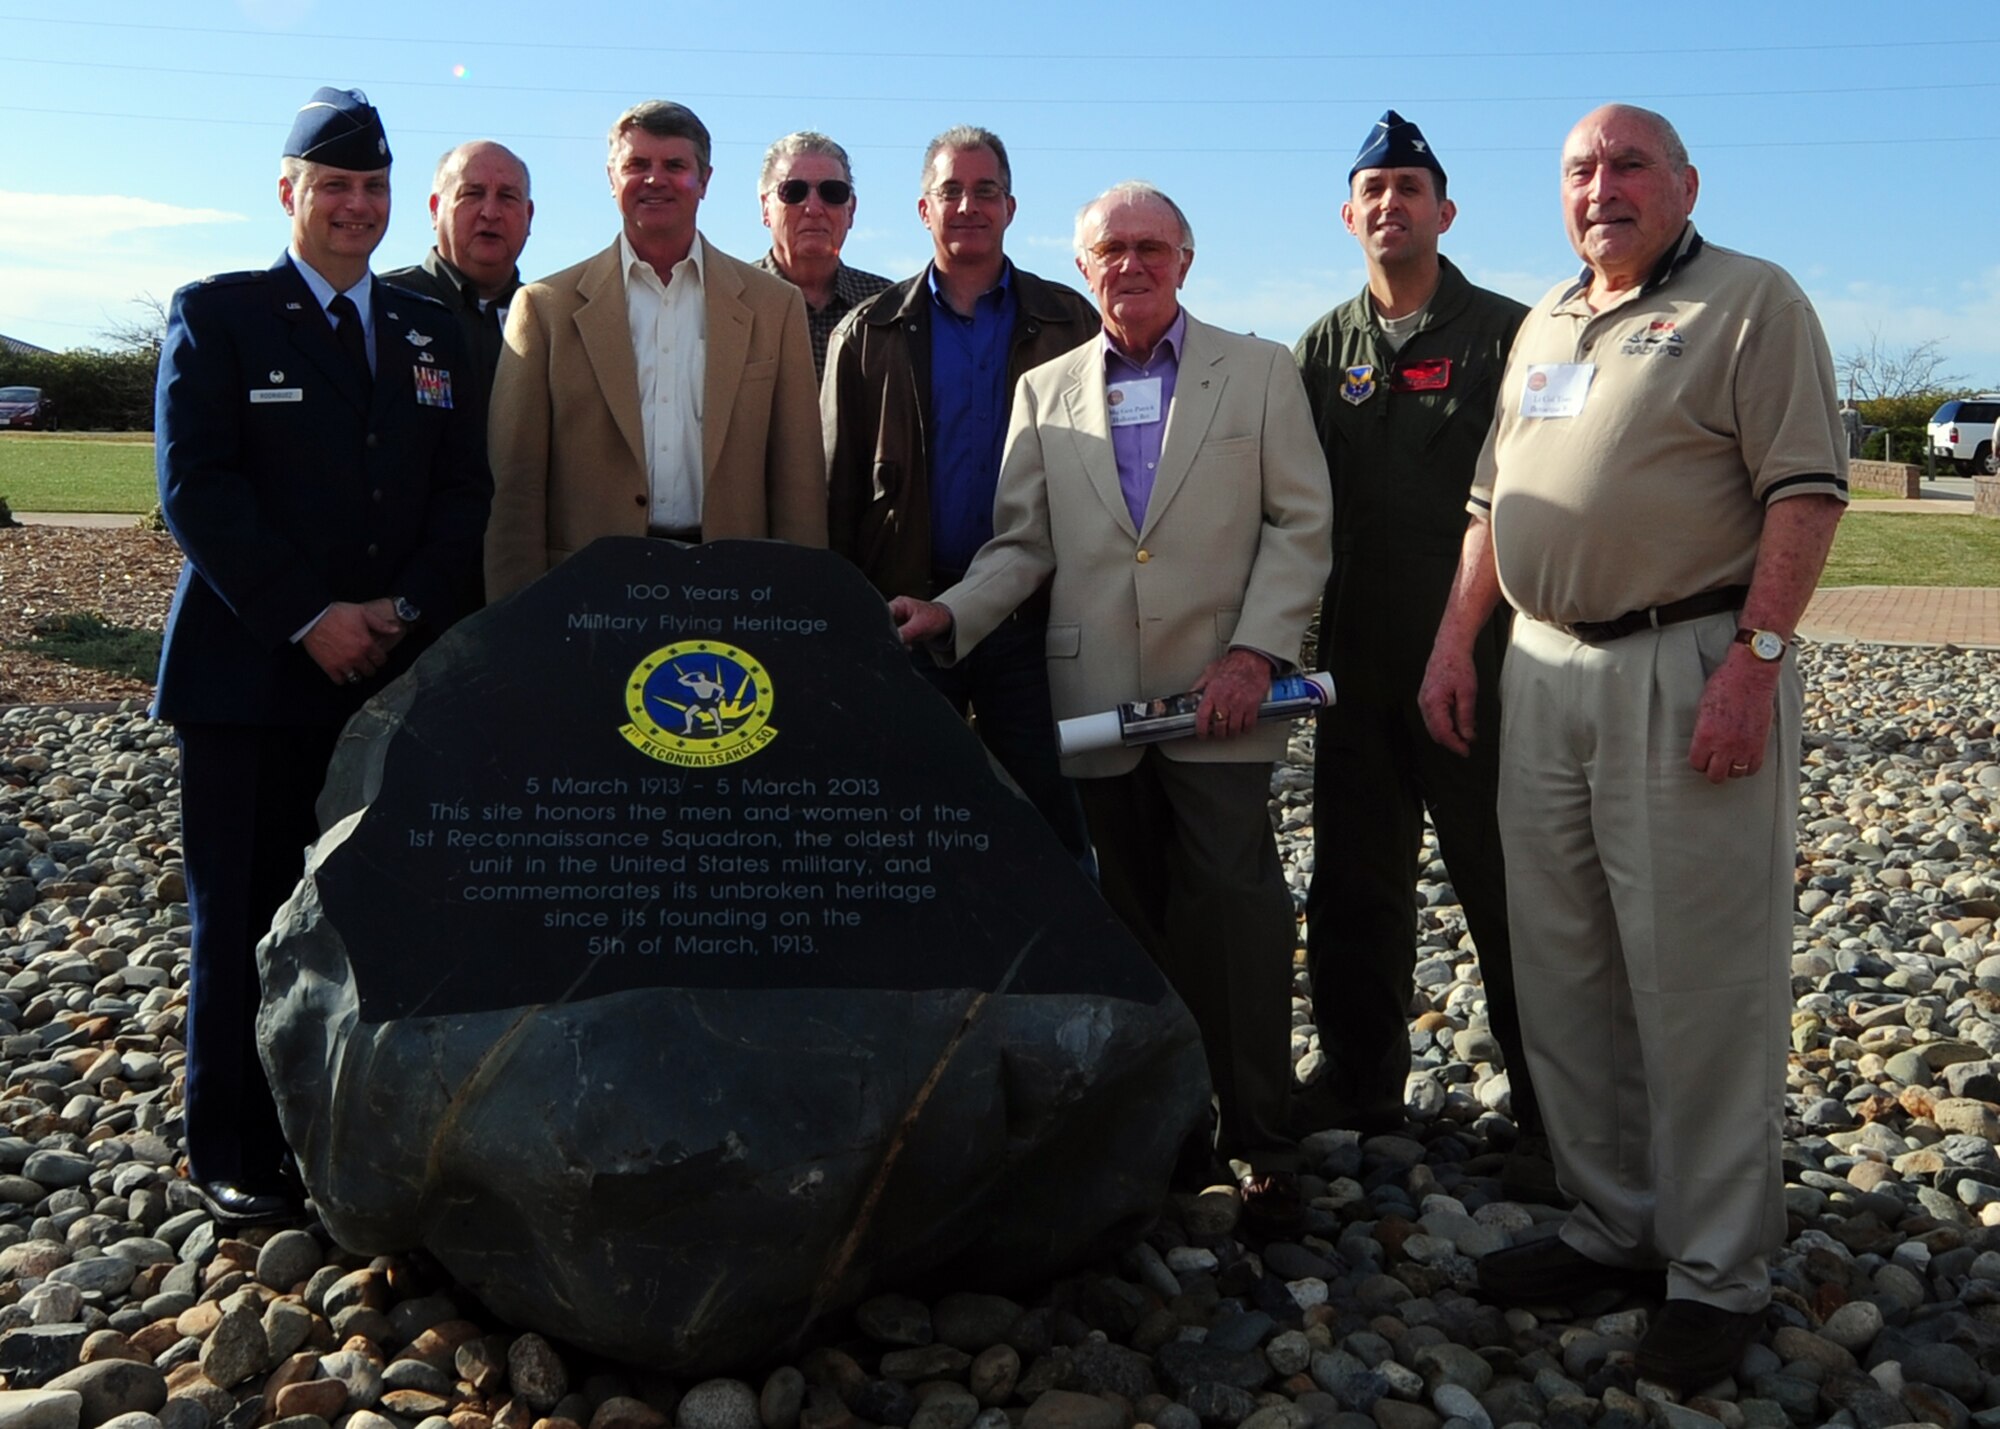 Former and current 1st Reconnaissance Squadron commanders, SR-71 Blackbird and U-2 “Dragon Lady” pilots pose with a plaque dedicated to the squadron during their centennial celebration March 8, 2013 at Beale Air Force Base, Calif. The plaque at Heritage Park rests in the shadow of an SR-71 Blackbird. (U.S. Air Force photo by Senior Airman Shawn Nickel/Released)